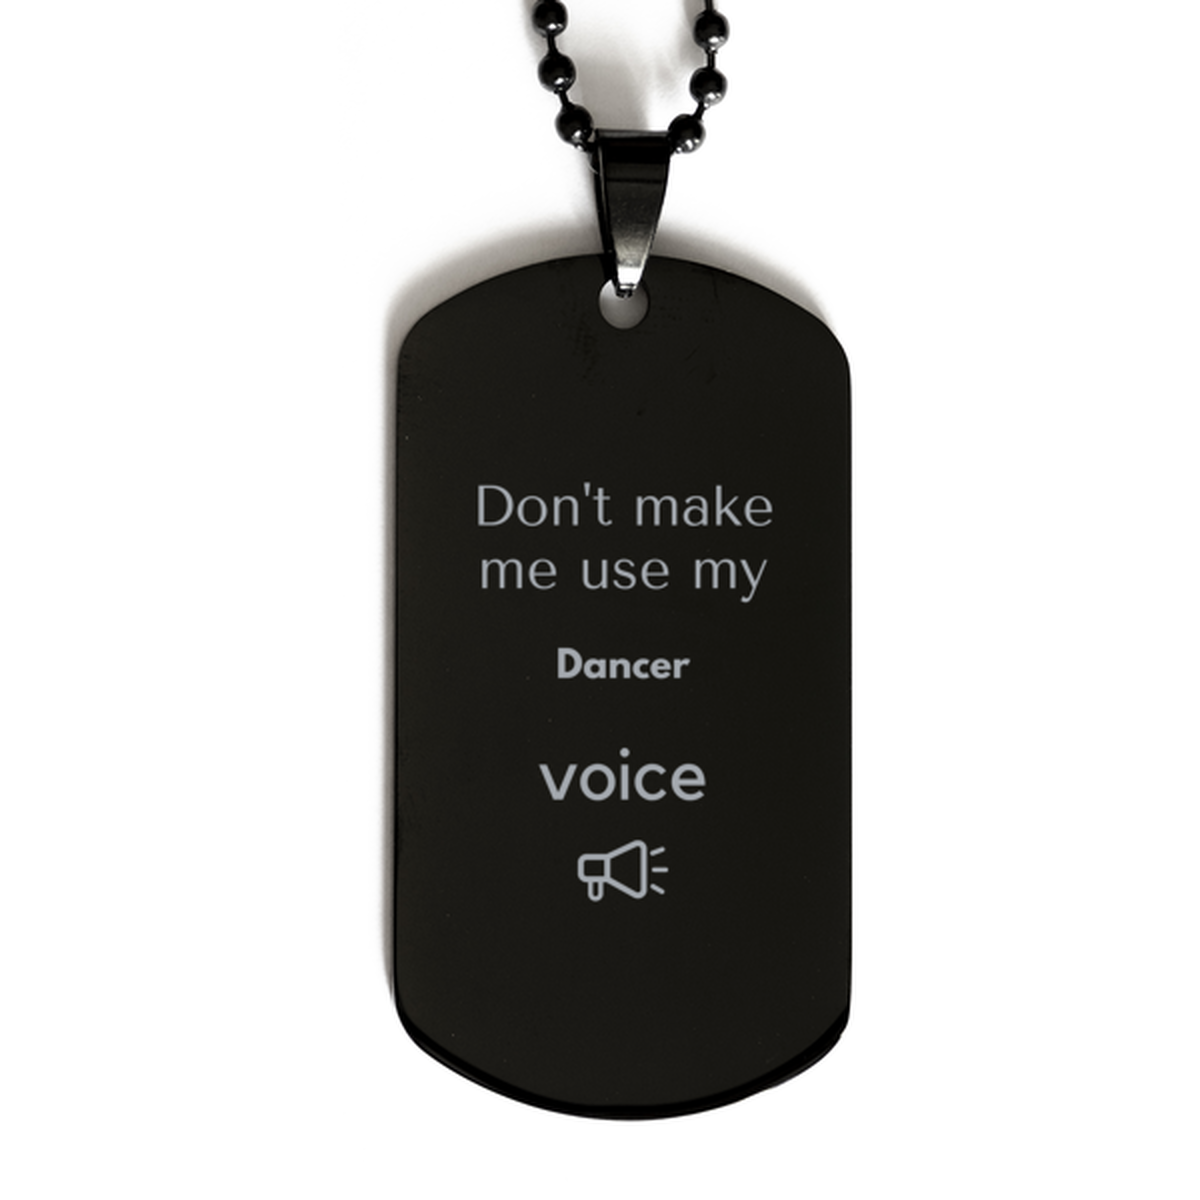 Don't make me use my Dancer voice, Sarcasm Dancer Gifts, Christmas Dancer Black Dog Tag Birthday Unique Gifts For Dancer Coworkers, Men, Women, Colleague, Friends